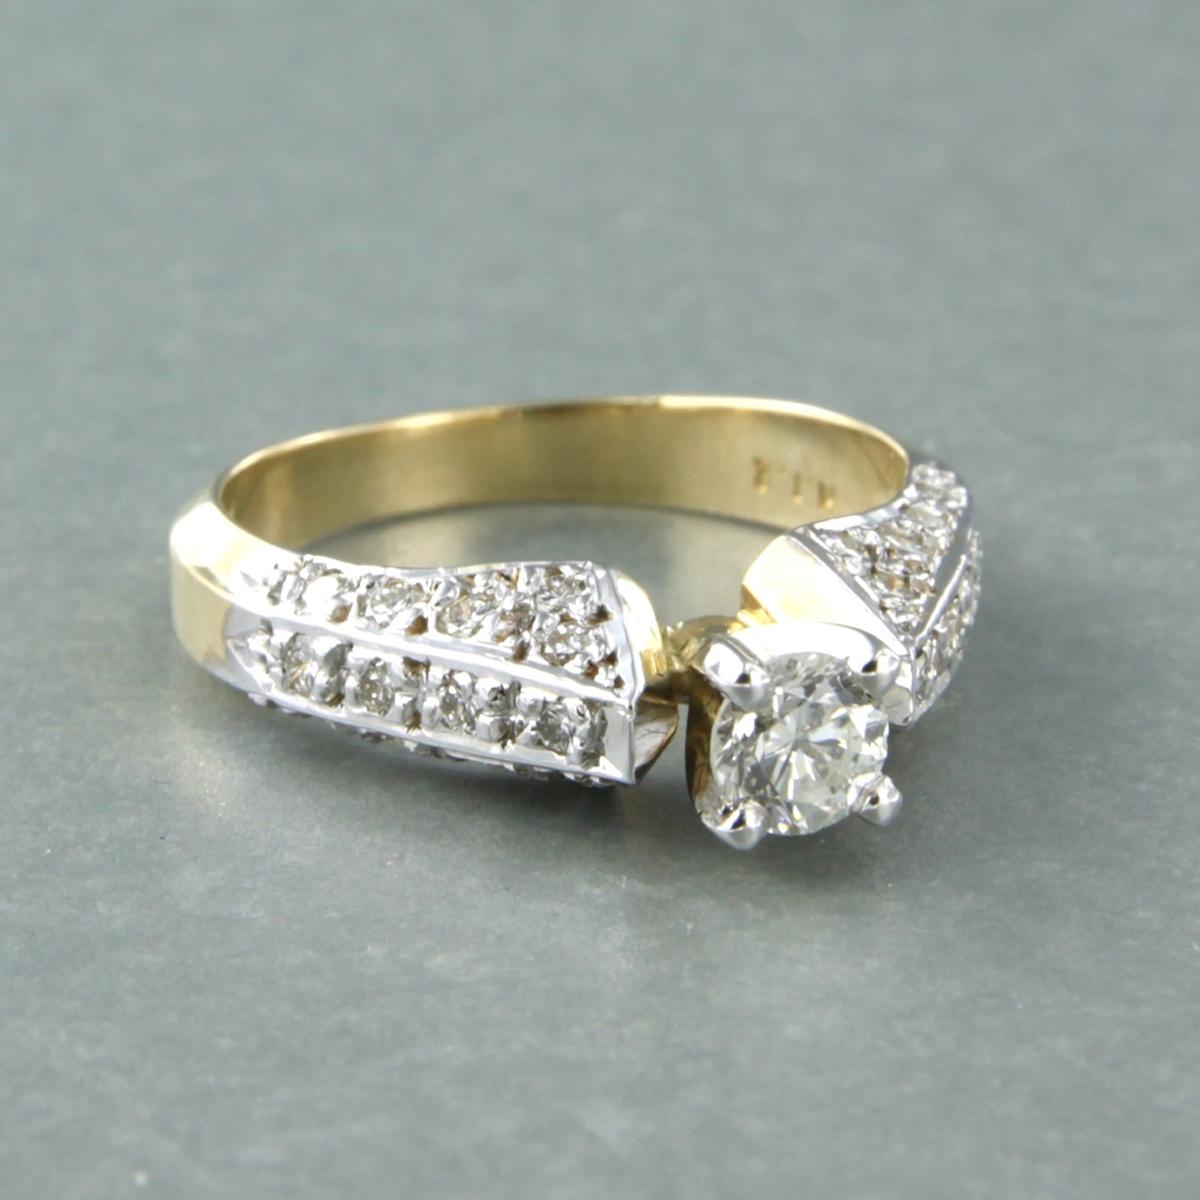 Bicolour Gold Diamond Ring In Good Condition For Sale In The Hague, ZH